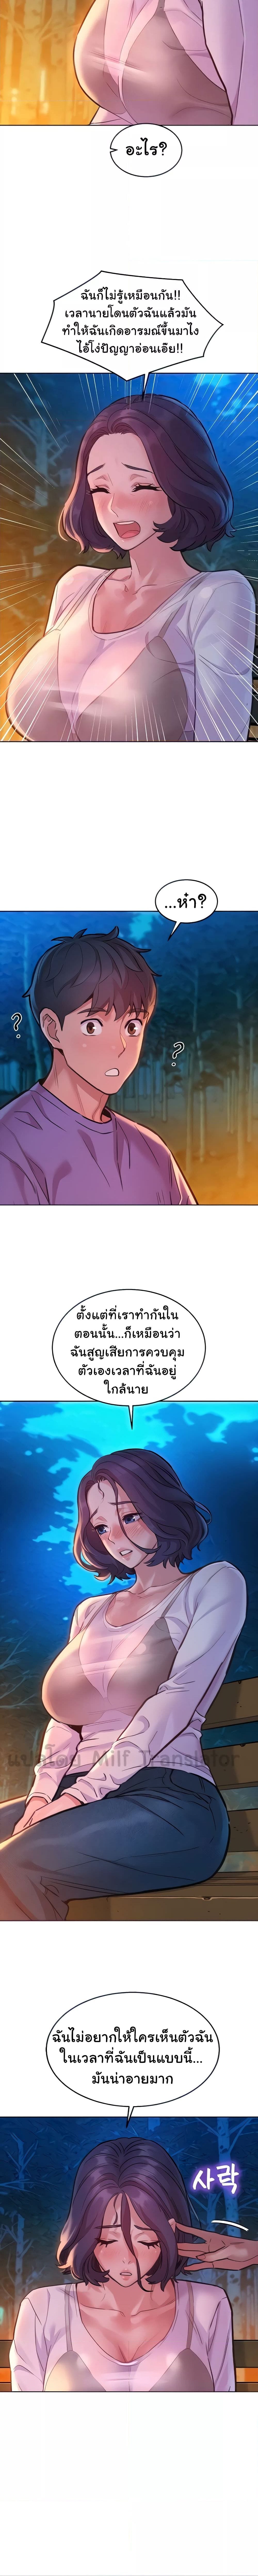 Let’s Hang Out from Today ตอนที่ 38 ภาพ 14